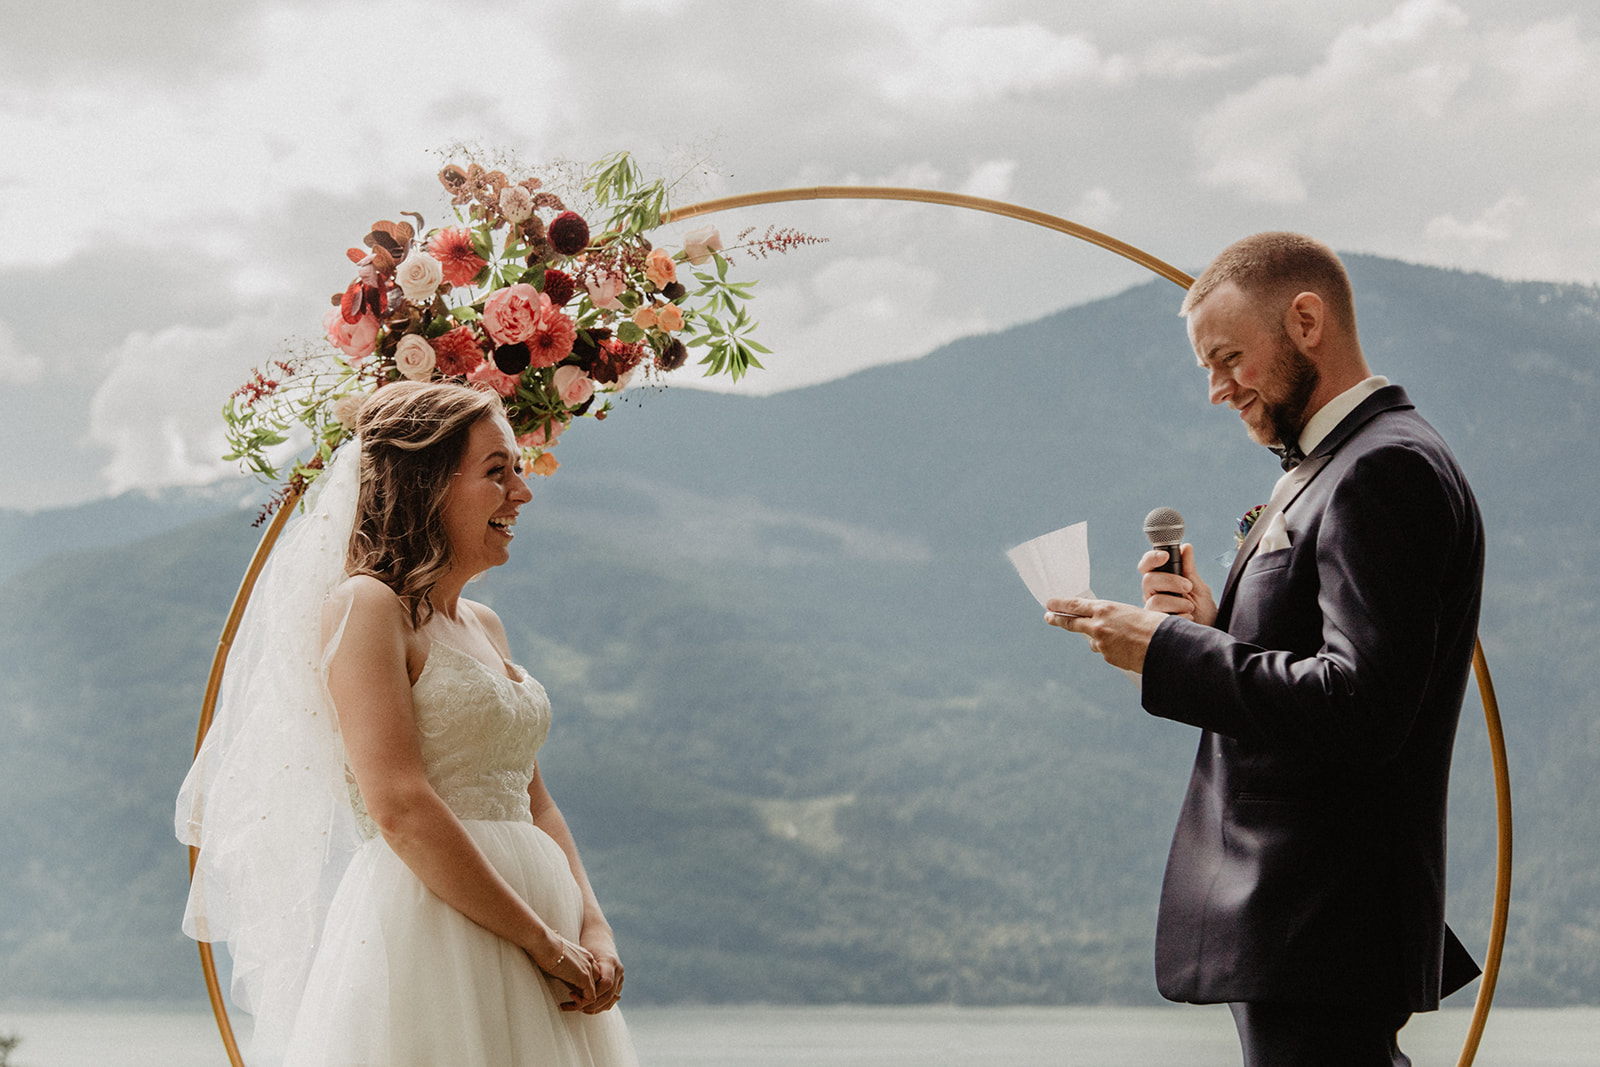 Sunny Vancouver wedding ceremony in front of mountain views